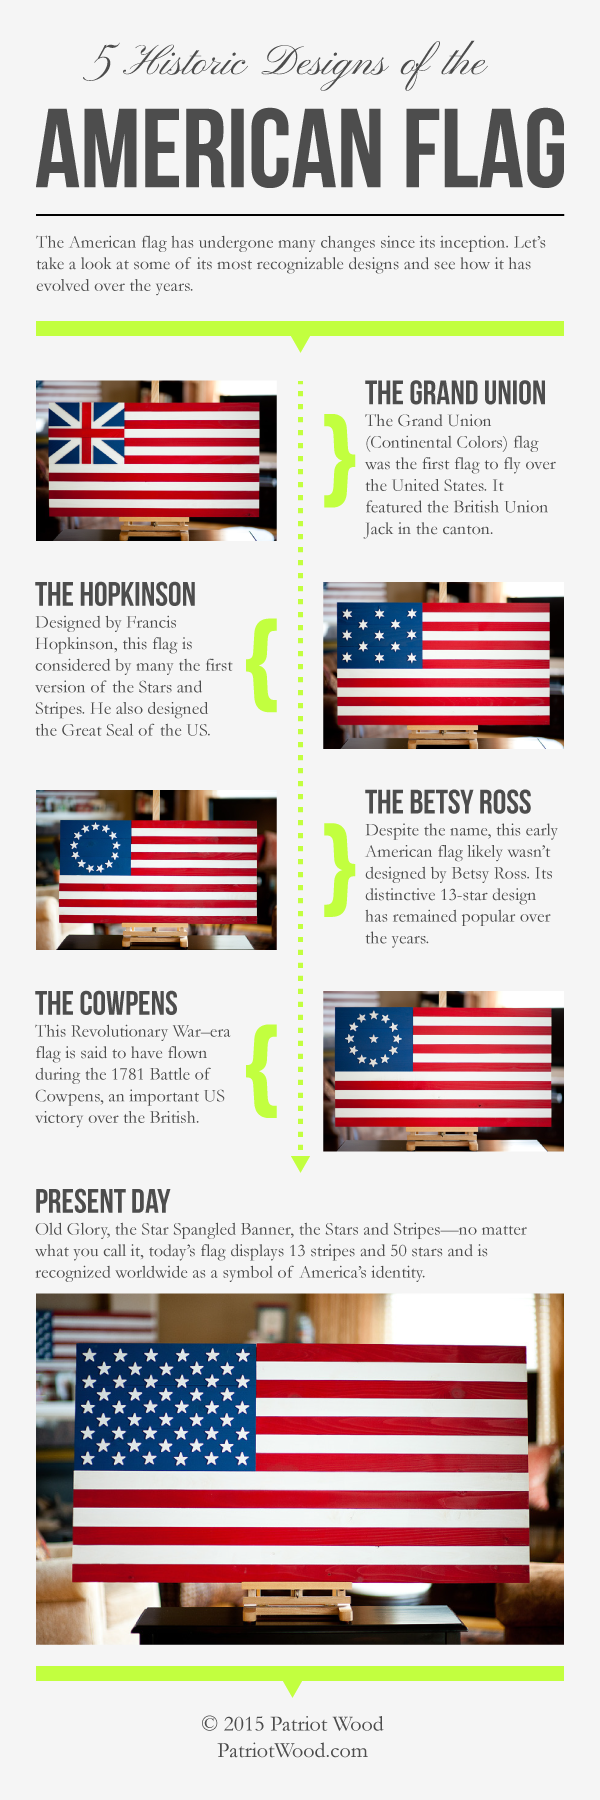 american flag designs over time